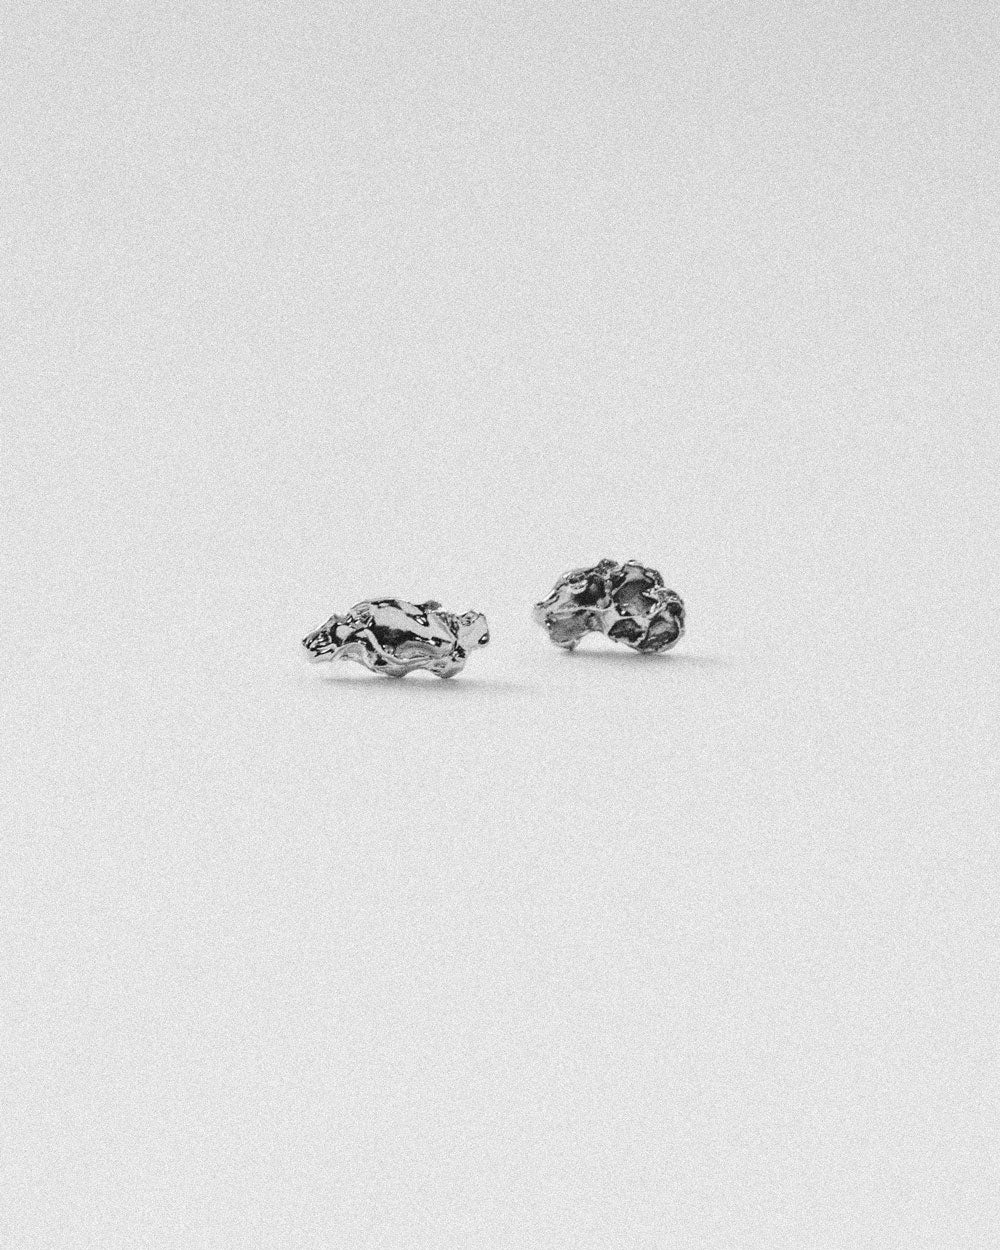 silver molten lava earring sterling silver precious metal hand made softandsticky softsticky